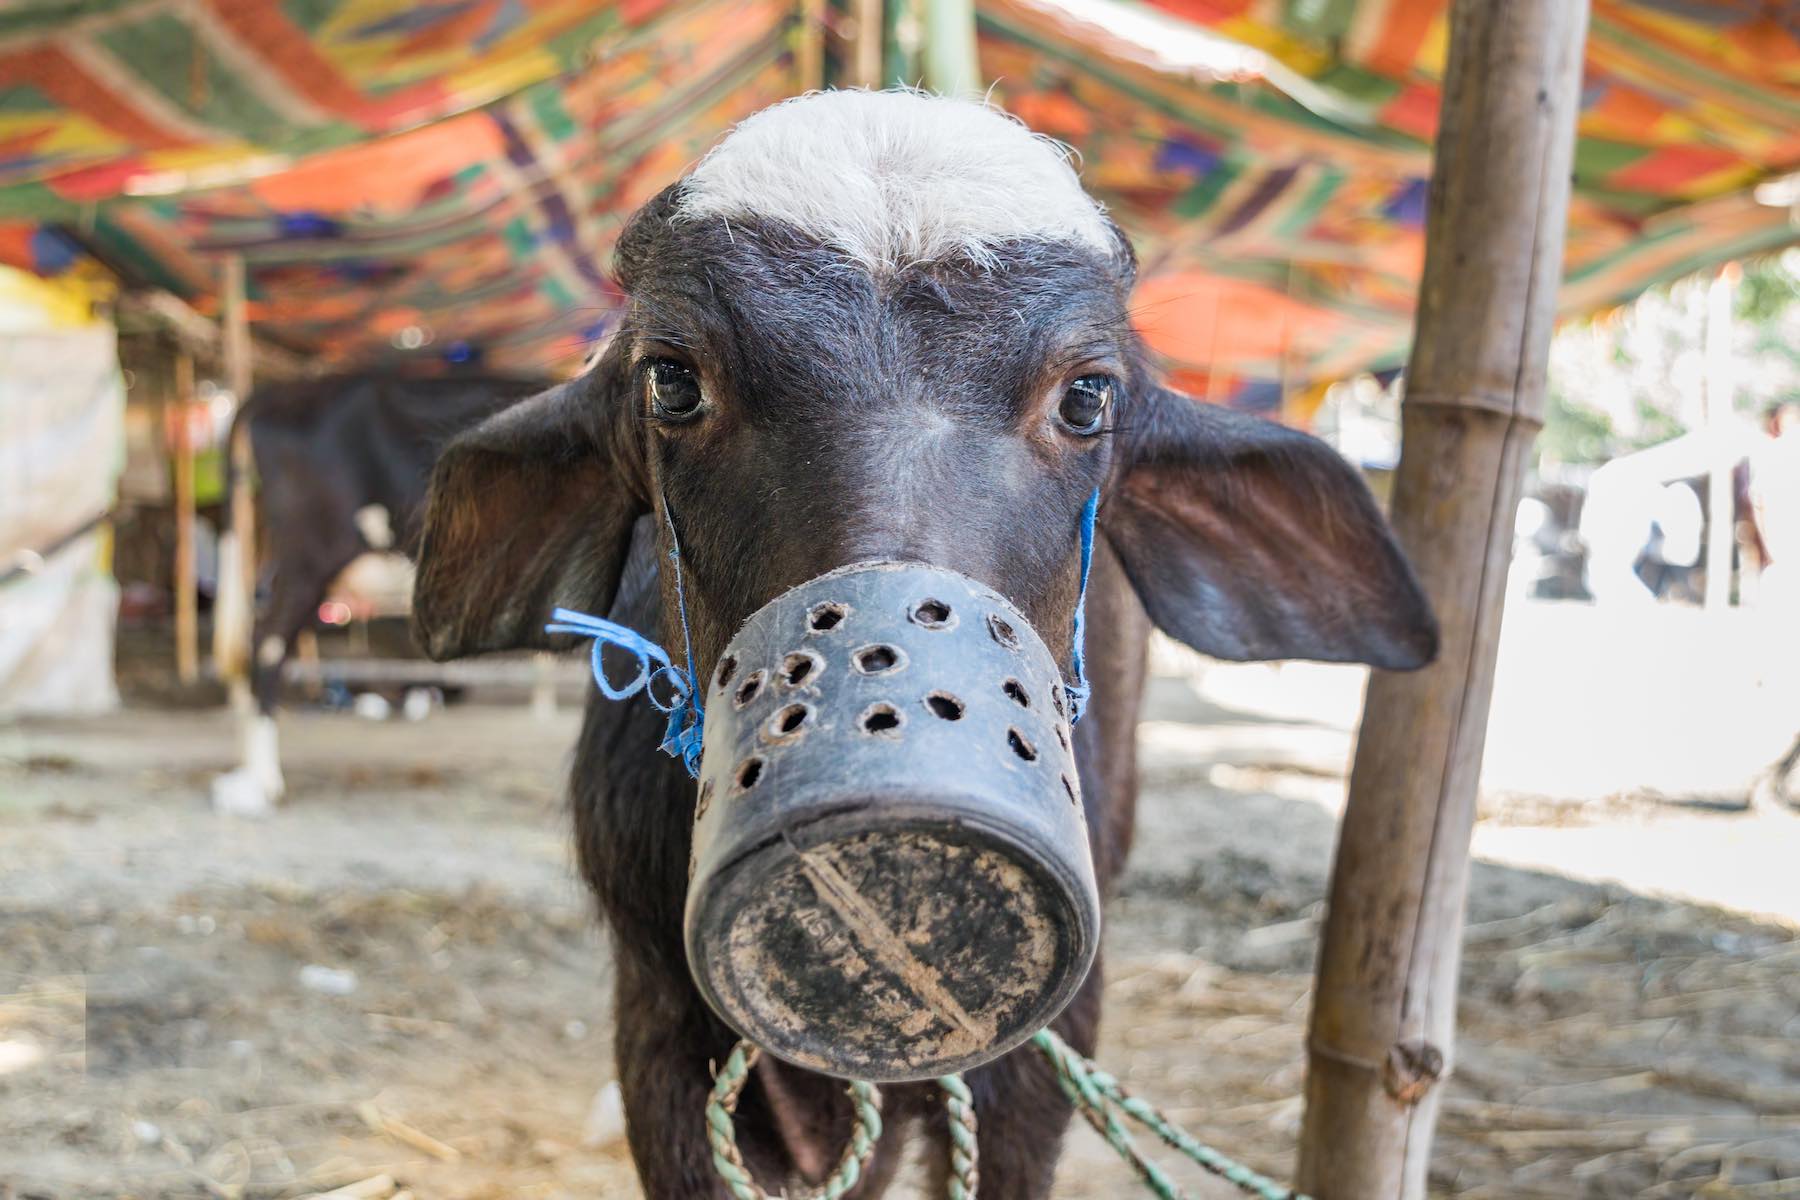 Photo of small baby Indian buffalo calf with mouthblock on to prevent calf suckling their mother's milk at Sonepur cattle fair in Bihar, India